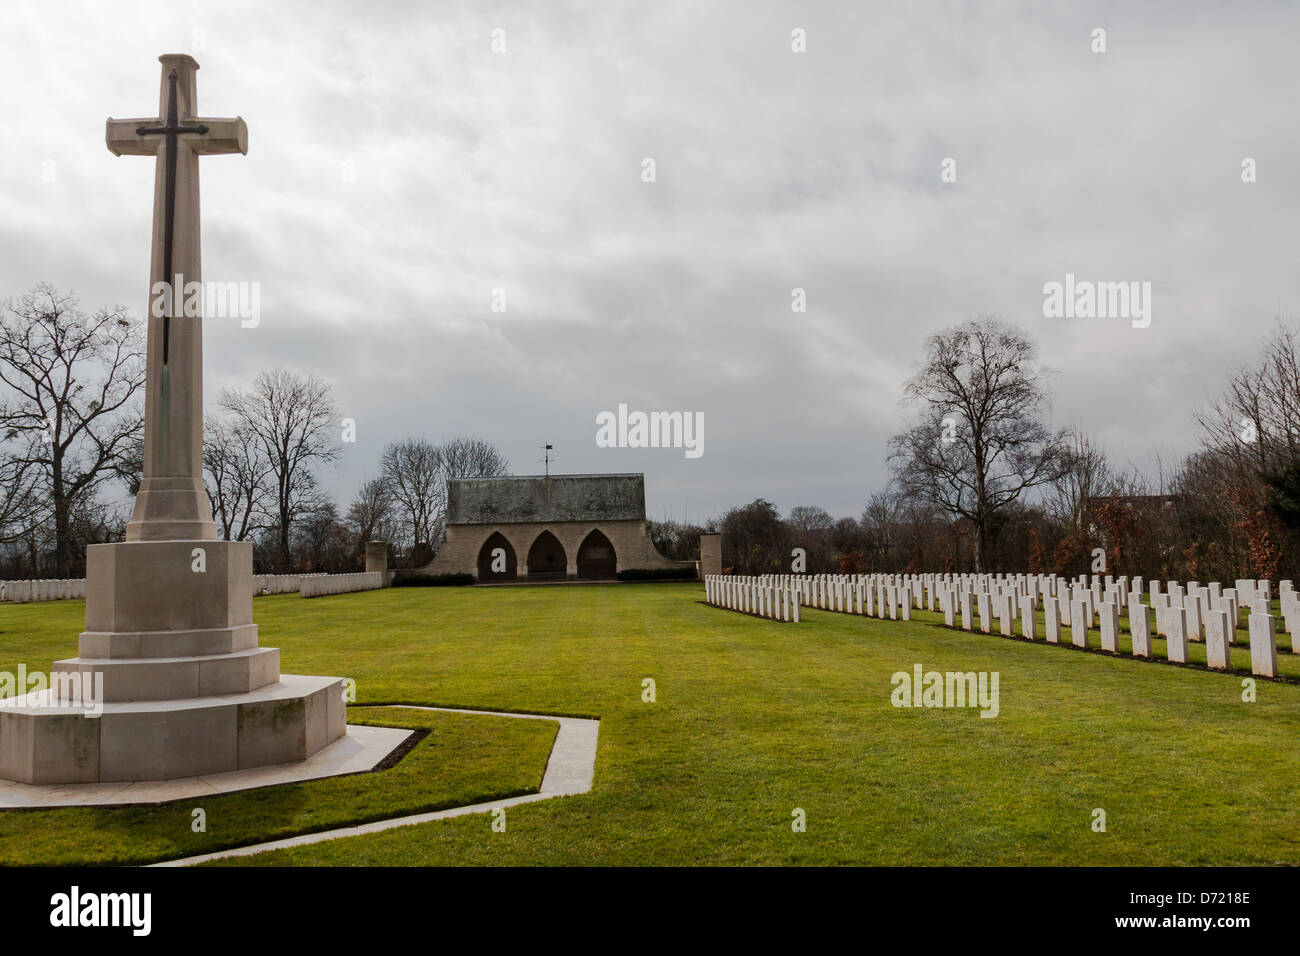 English Memorial and Military cemetery of second war (1939-1945) in Hermanville-Sur-Mer, Normandy, France Stock Photo